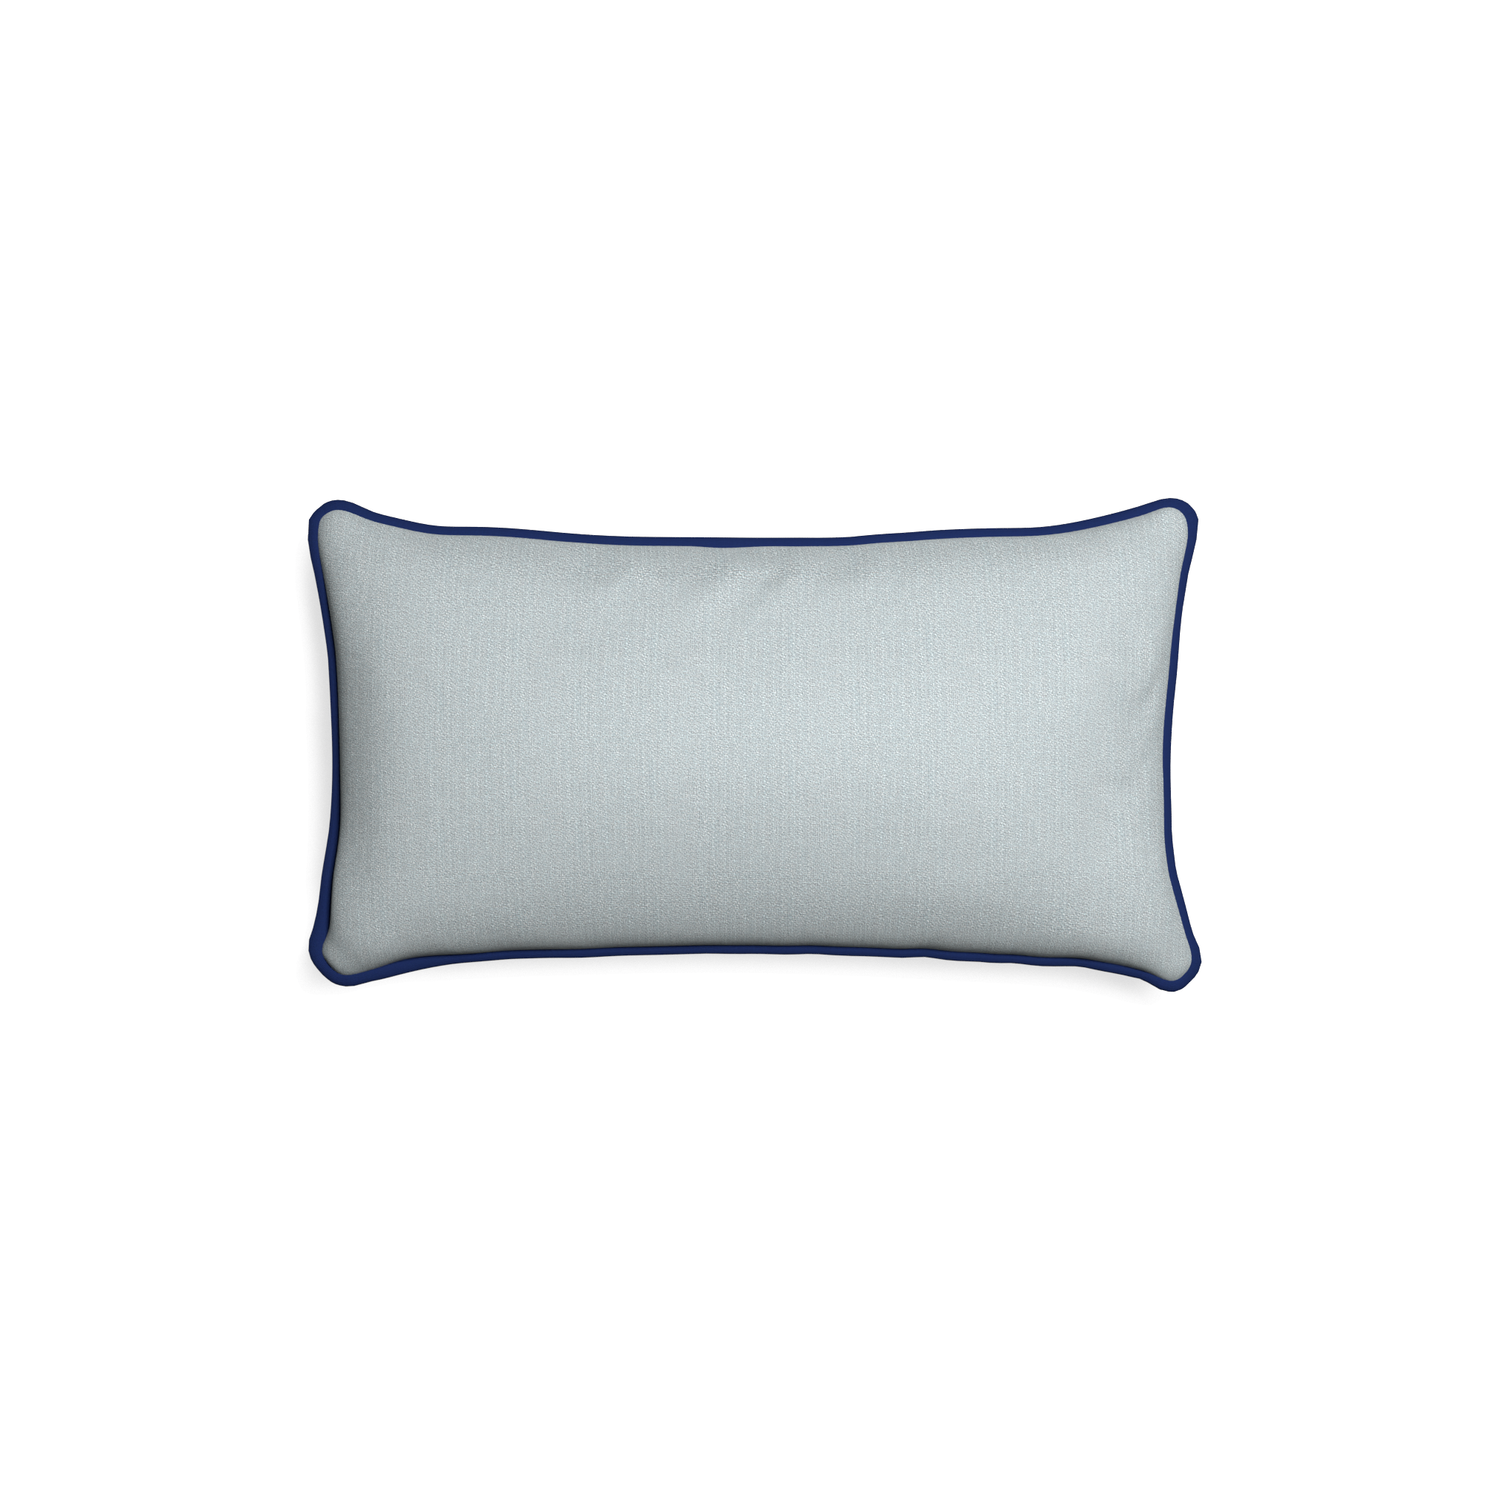 Petite-lumbar sea custom grey bluepillow with midnight piping on white background